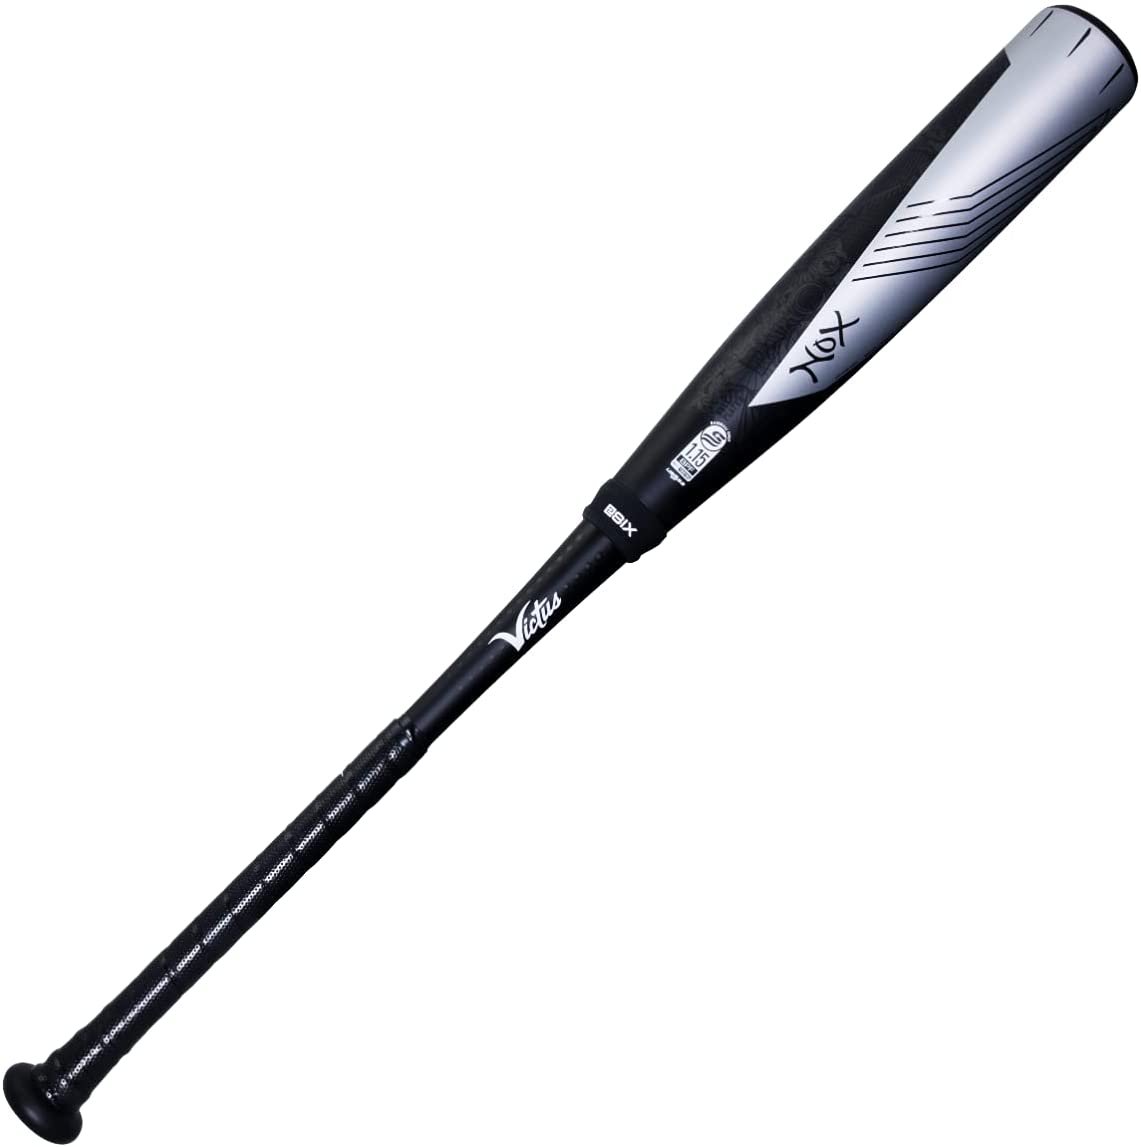 victus-sports-nox-10-baseball-bat-29-inch-19-oz VSBNX10-2919 Victus   Two-piece hybrid design built with a carbon composite handle and